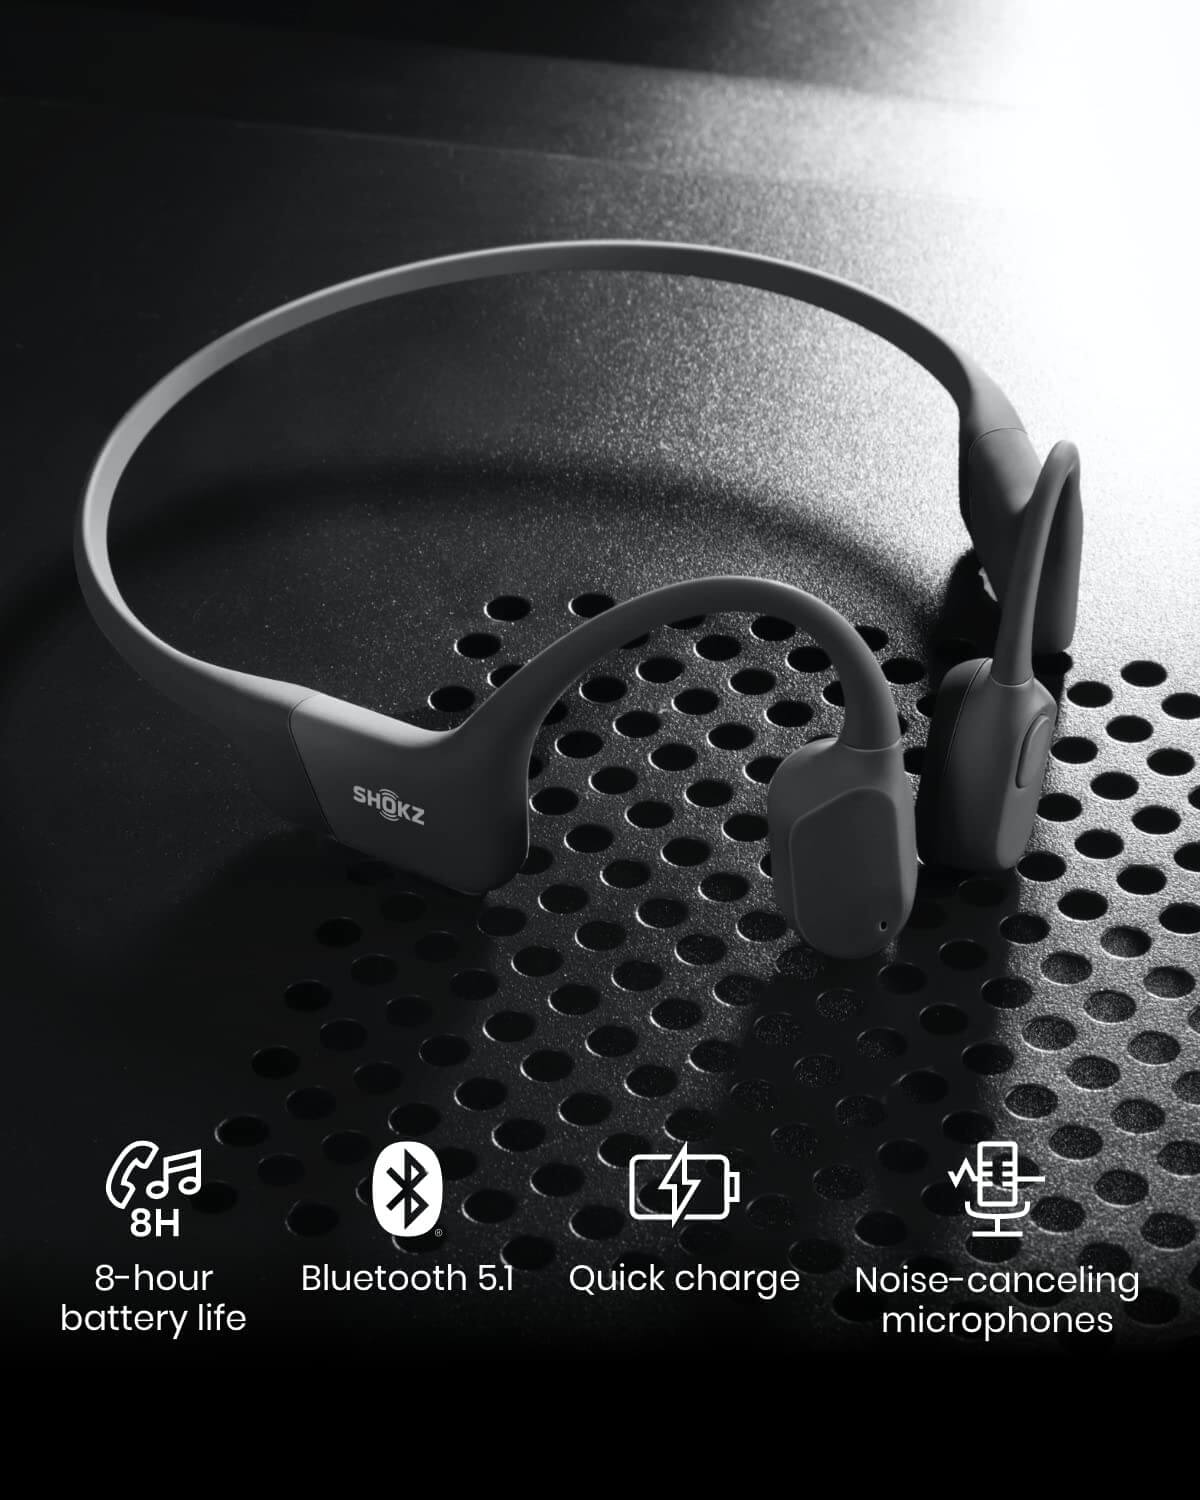 shokz openrun with 8hr battery life, quick charge, bluetooth 5.1, and noise-canceling microphones